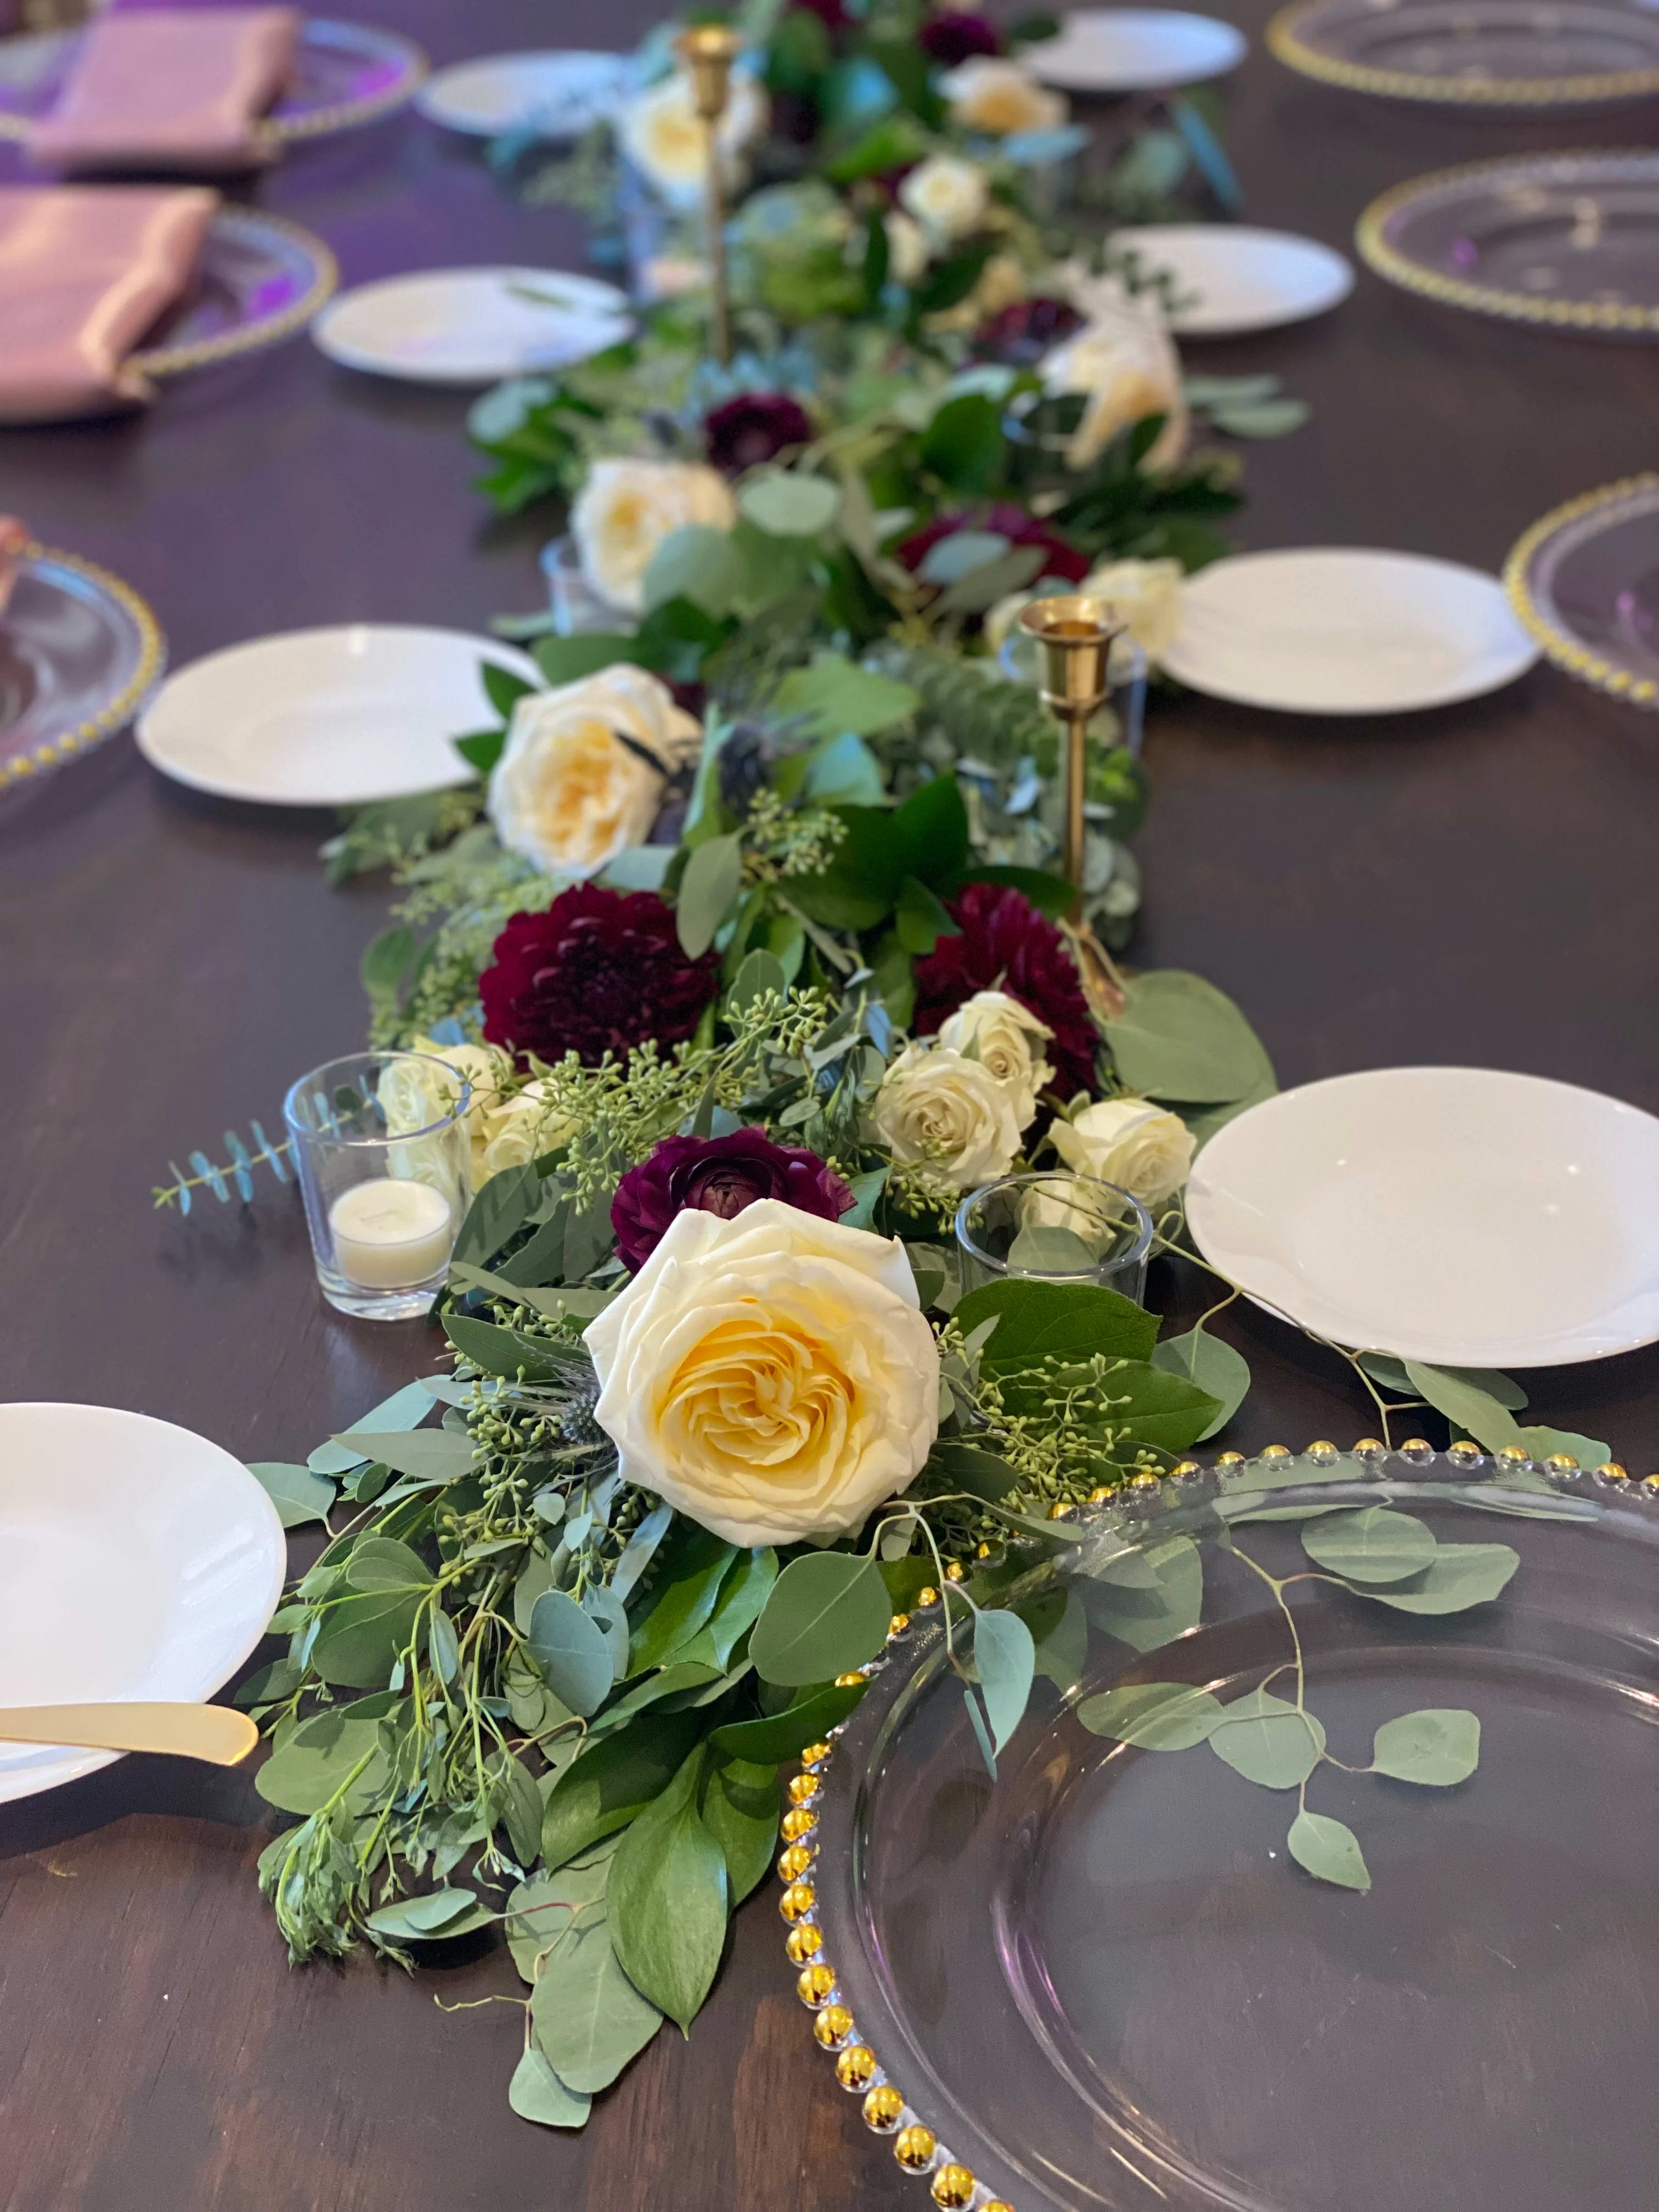 Eucalyptus Garland  - 5' Premium Eucalyptus Garland with Roses and Dahlias, any changes please cont us. 